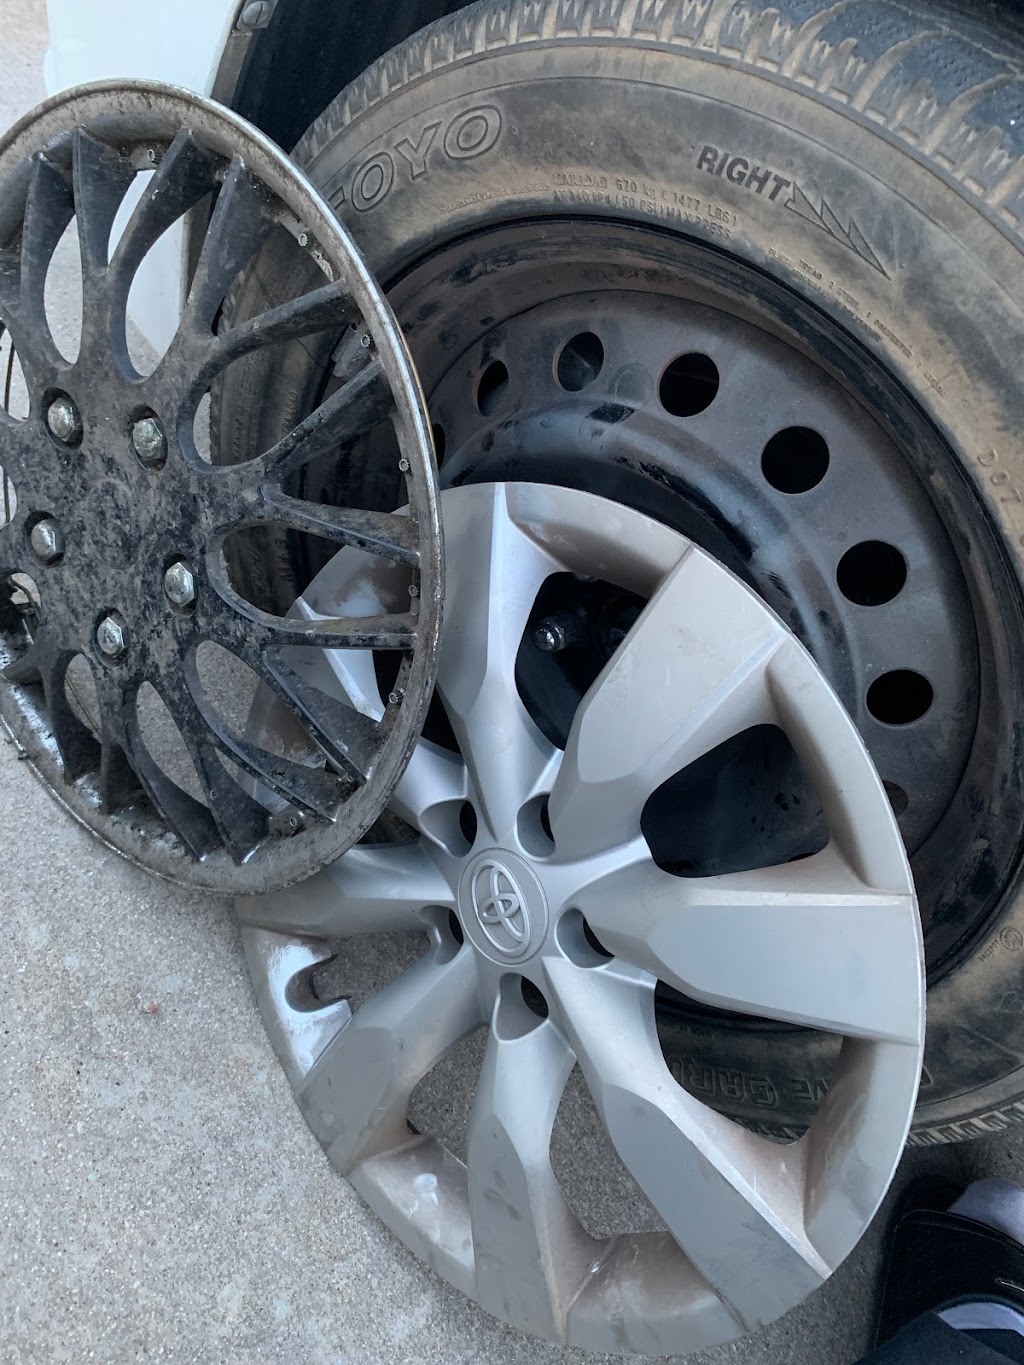 Tire Wholesale | 3321 W Pioneer Dr, Irving, TX 75061, USA | Phone: (972) 790-7200